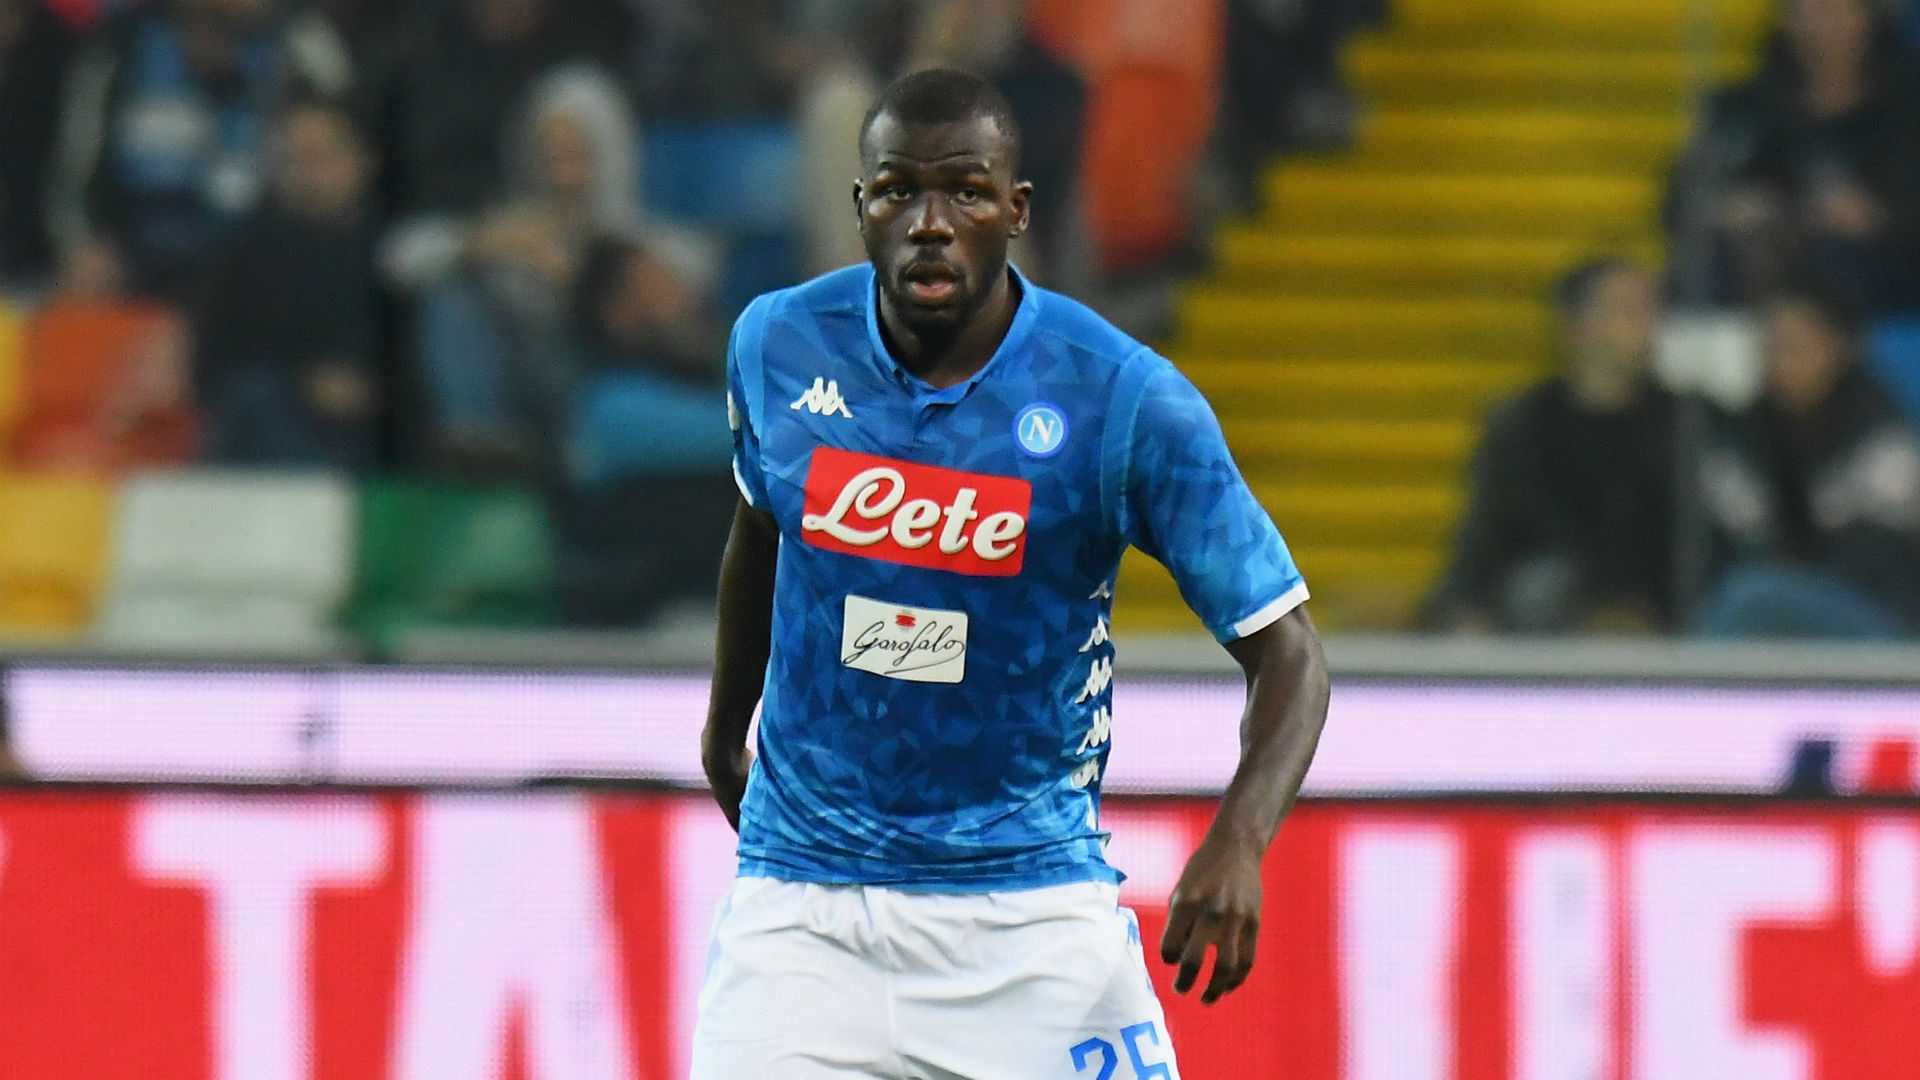 Manchester City could sell two players in a bid to land Napoli centre-back Kalidou Koulibaly.